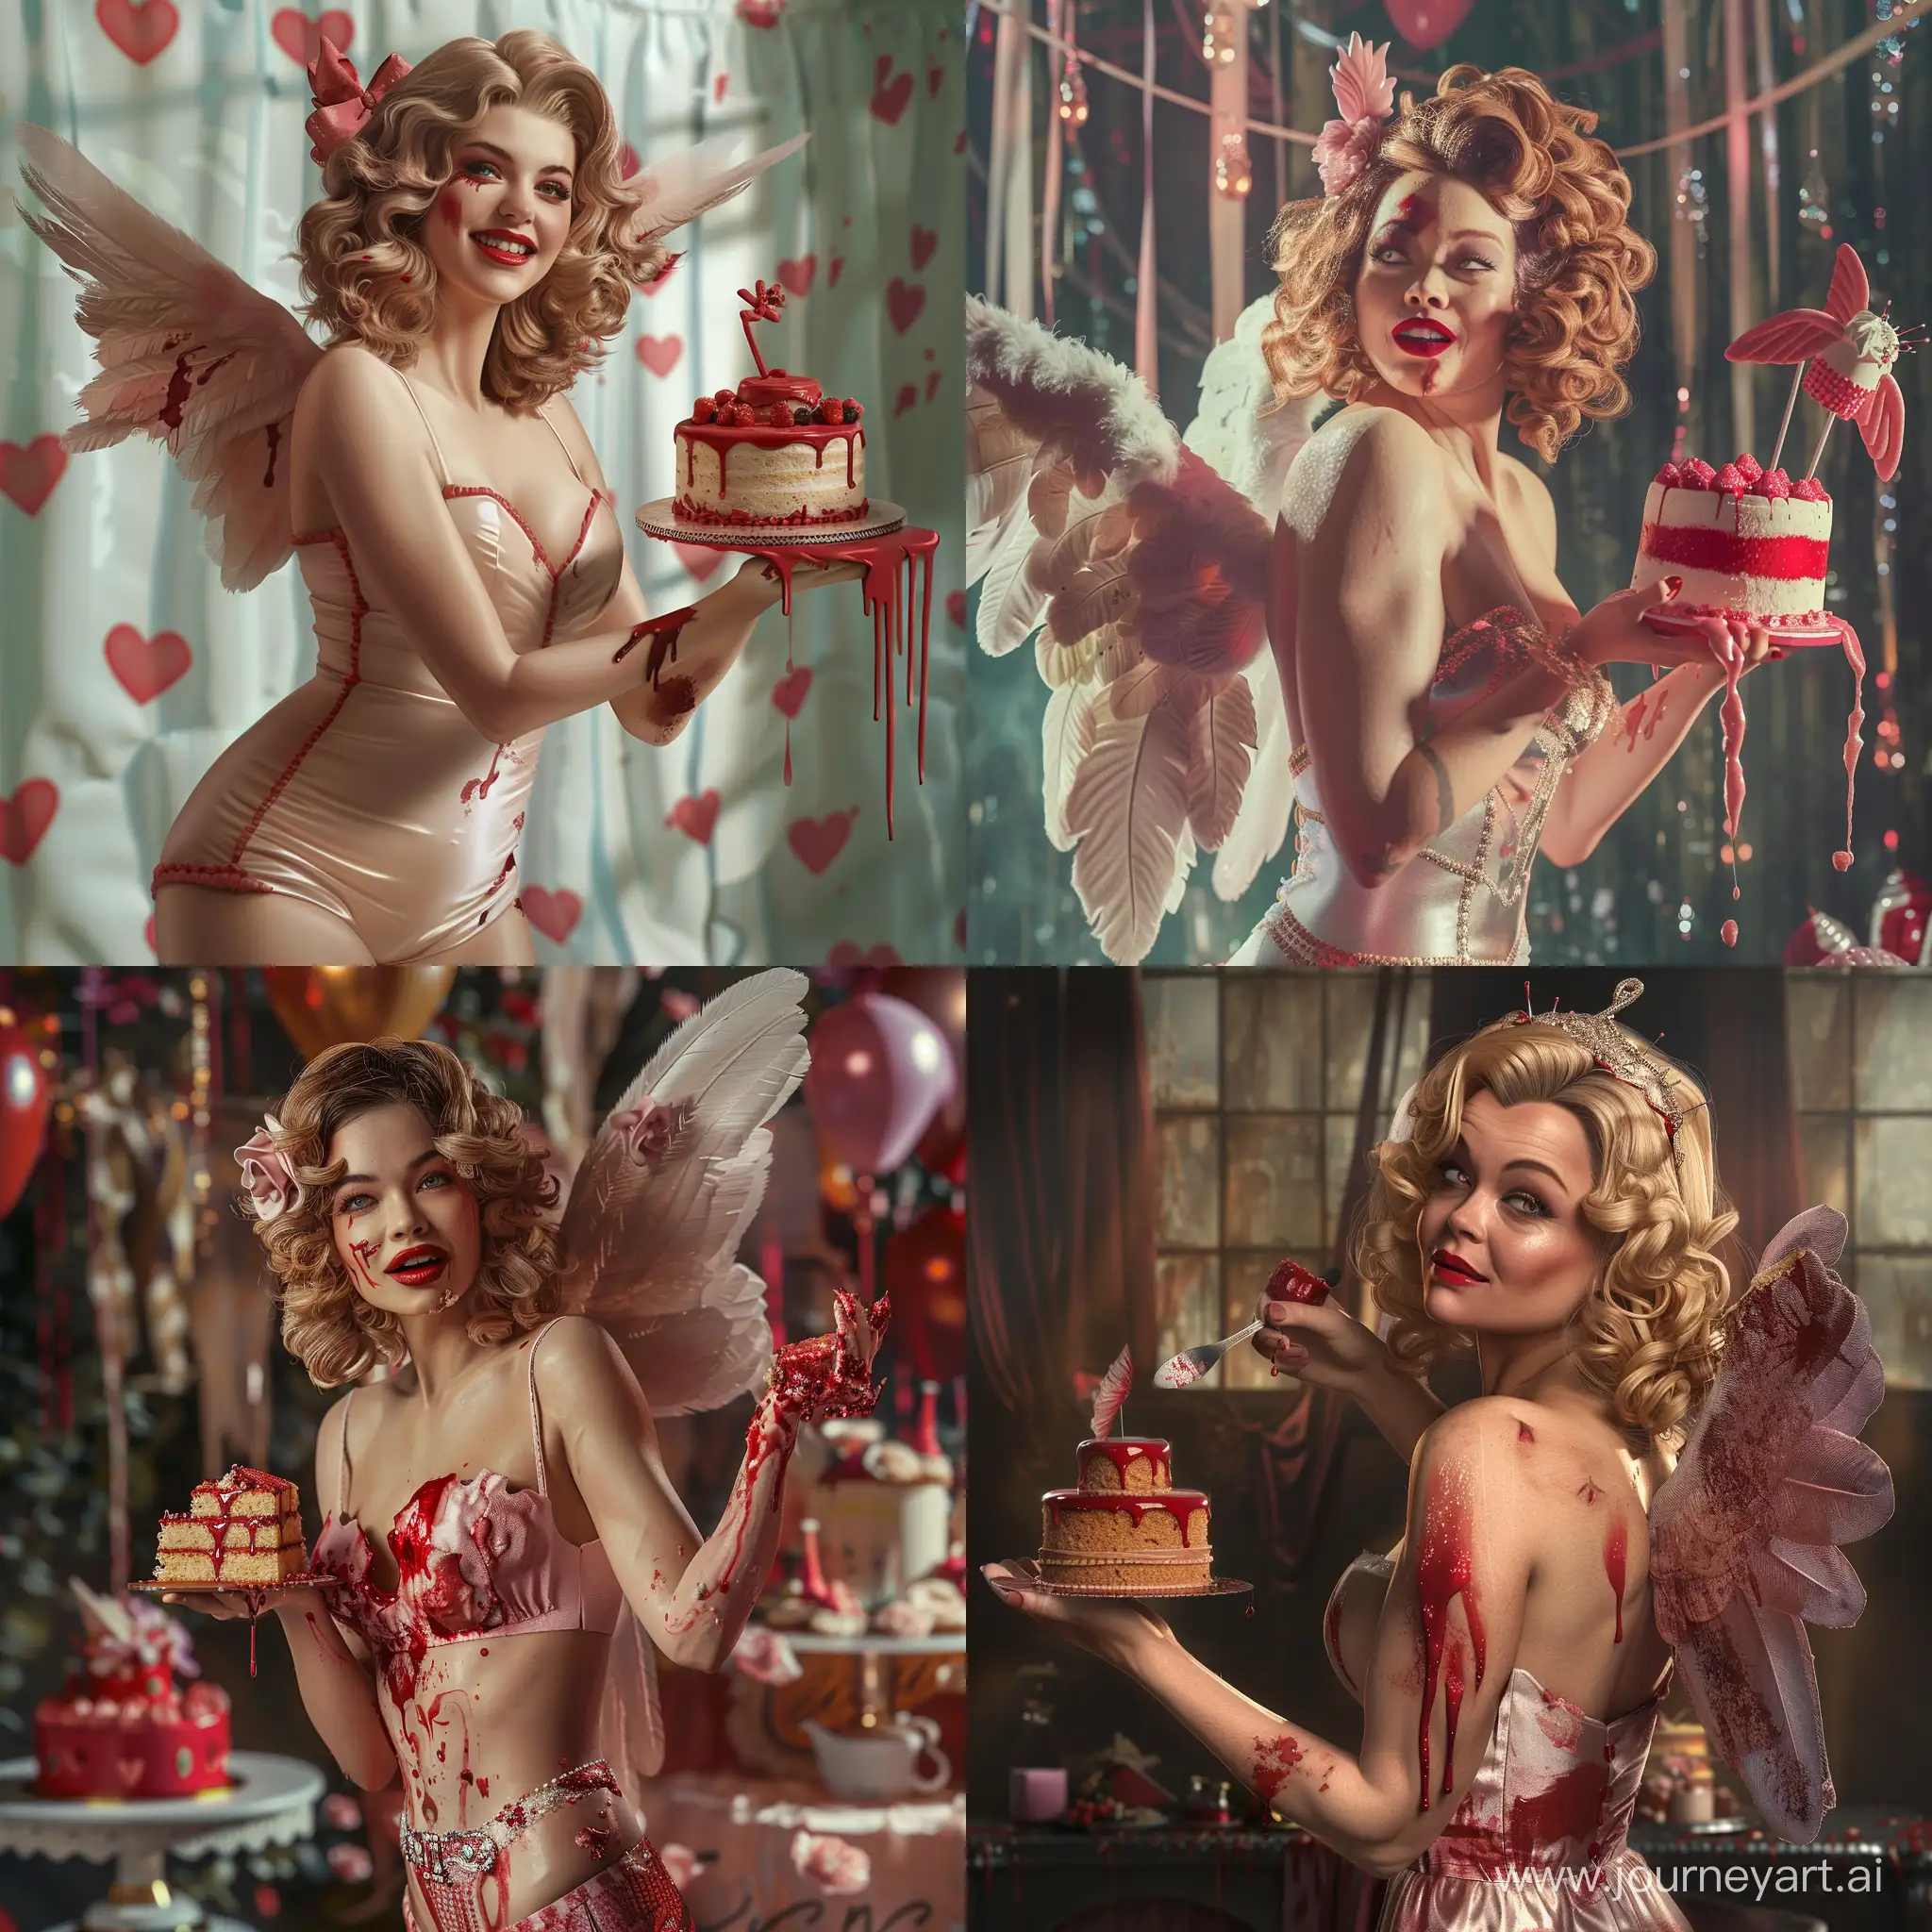 Sinister-50s-Angel-with-Bloody-Cake-at-Horror-Party